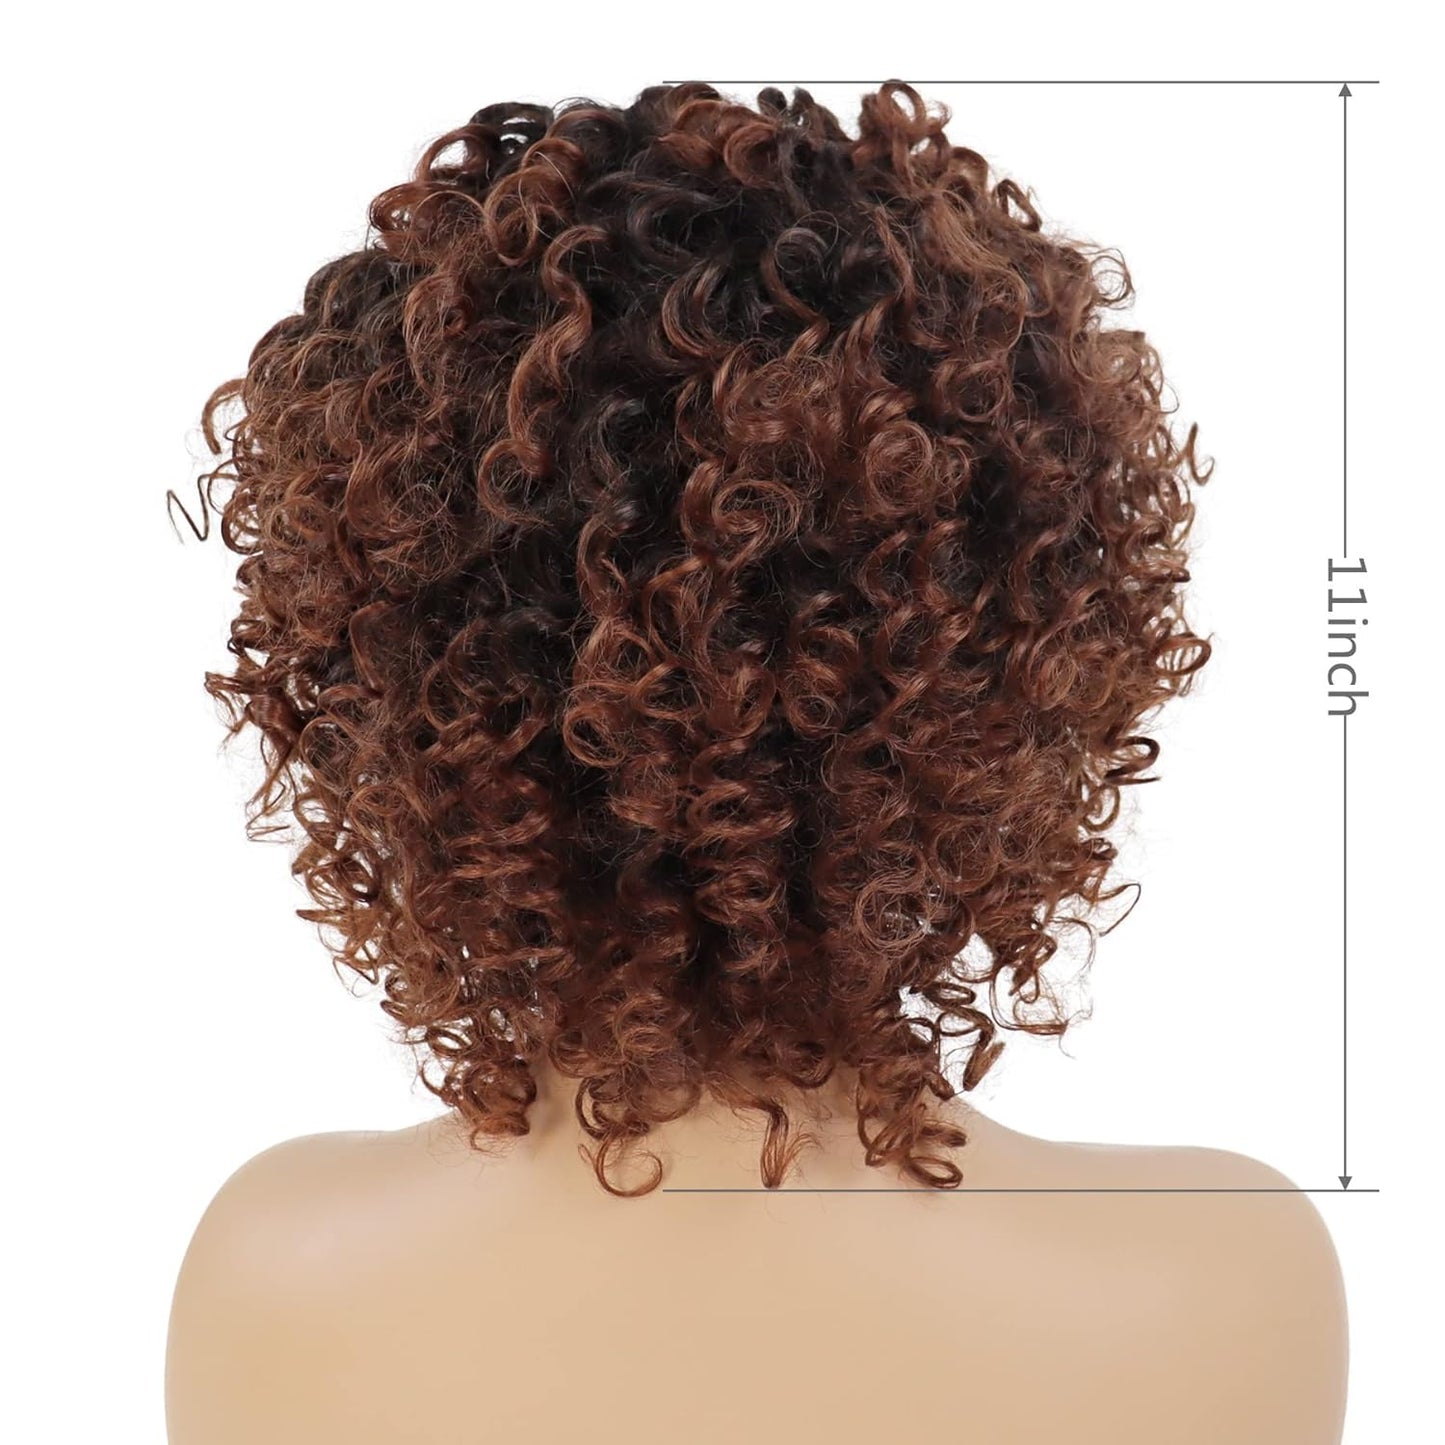 Short Curly Afro Wigs for Black Women Side Bangs Synthetic Wigs Kinky Afro Curly Wig Natural African American Hairstyles Full Hair Glueless Wig